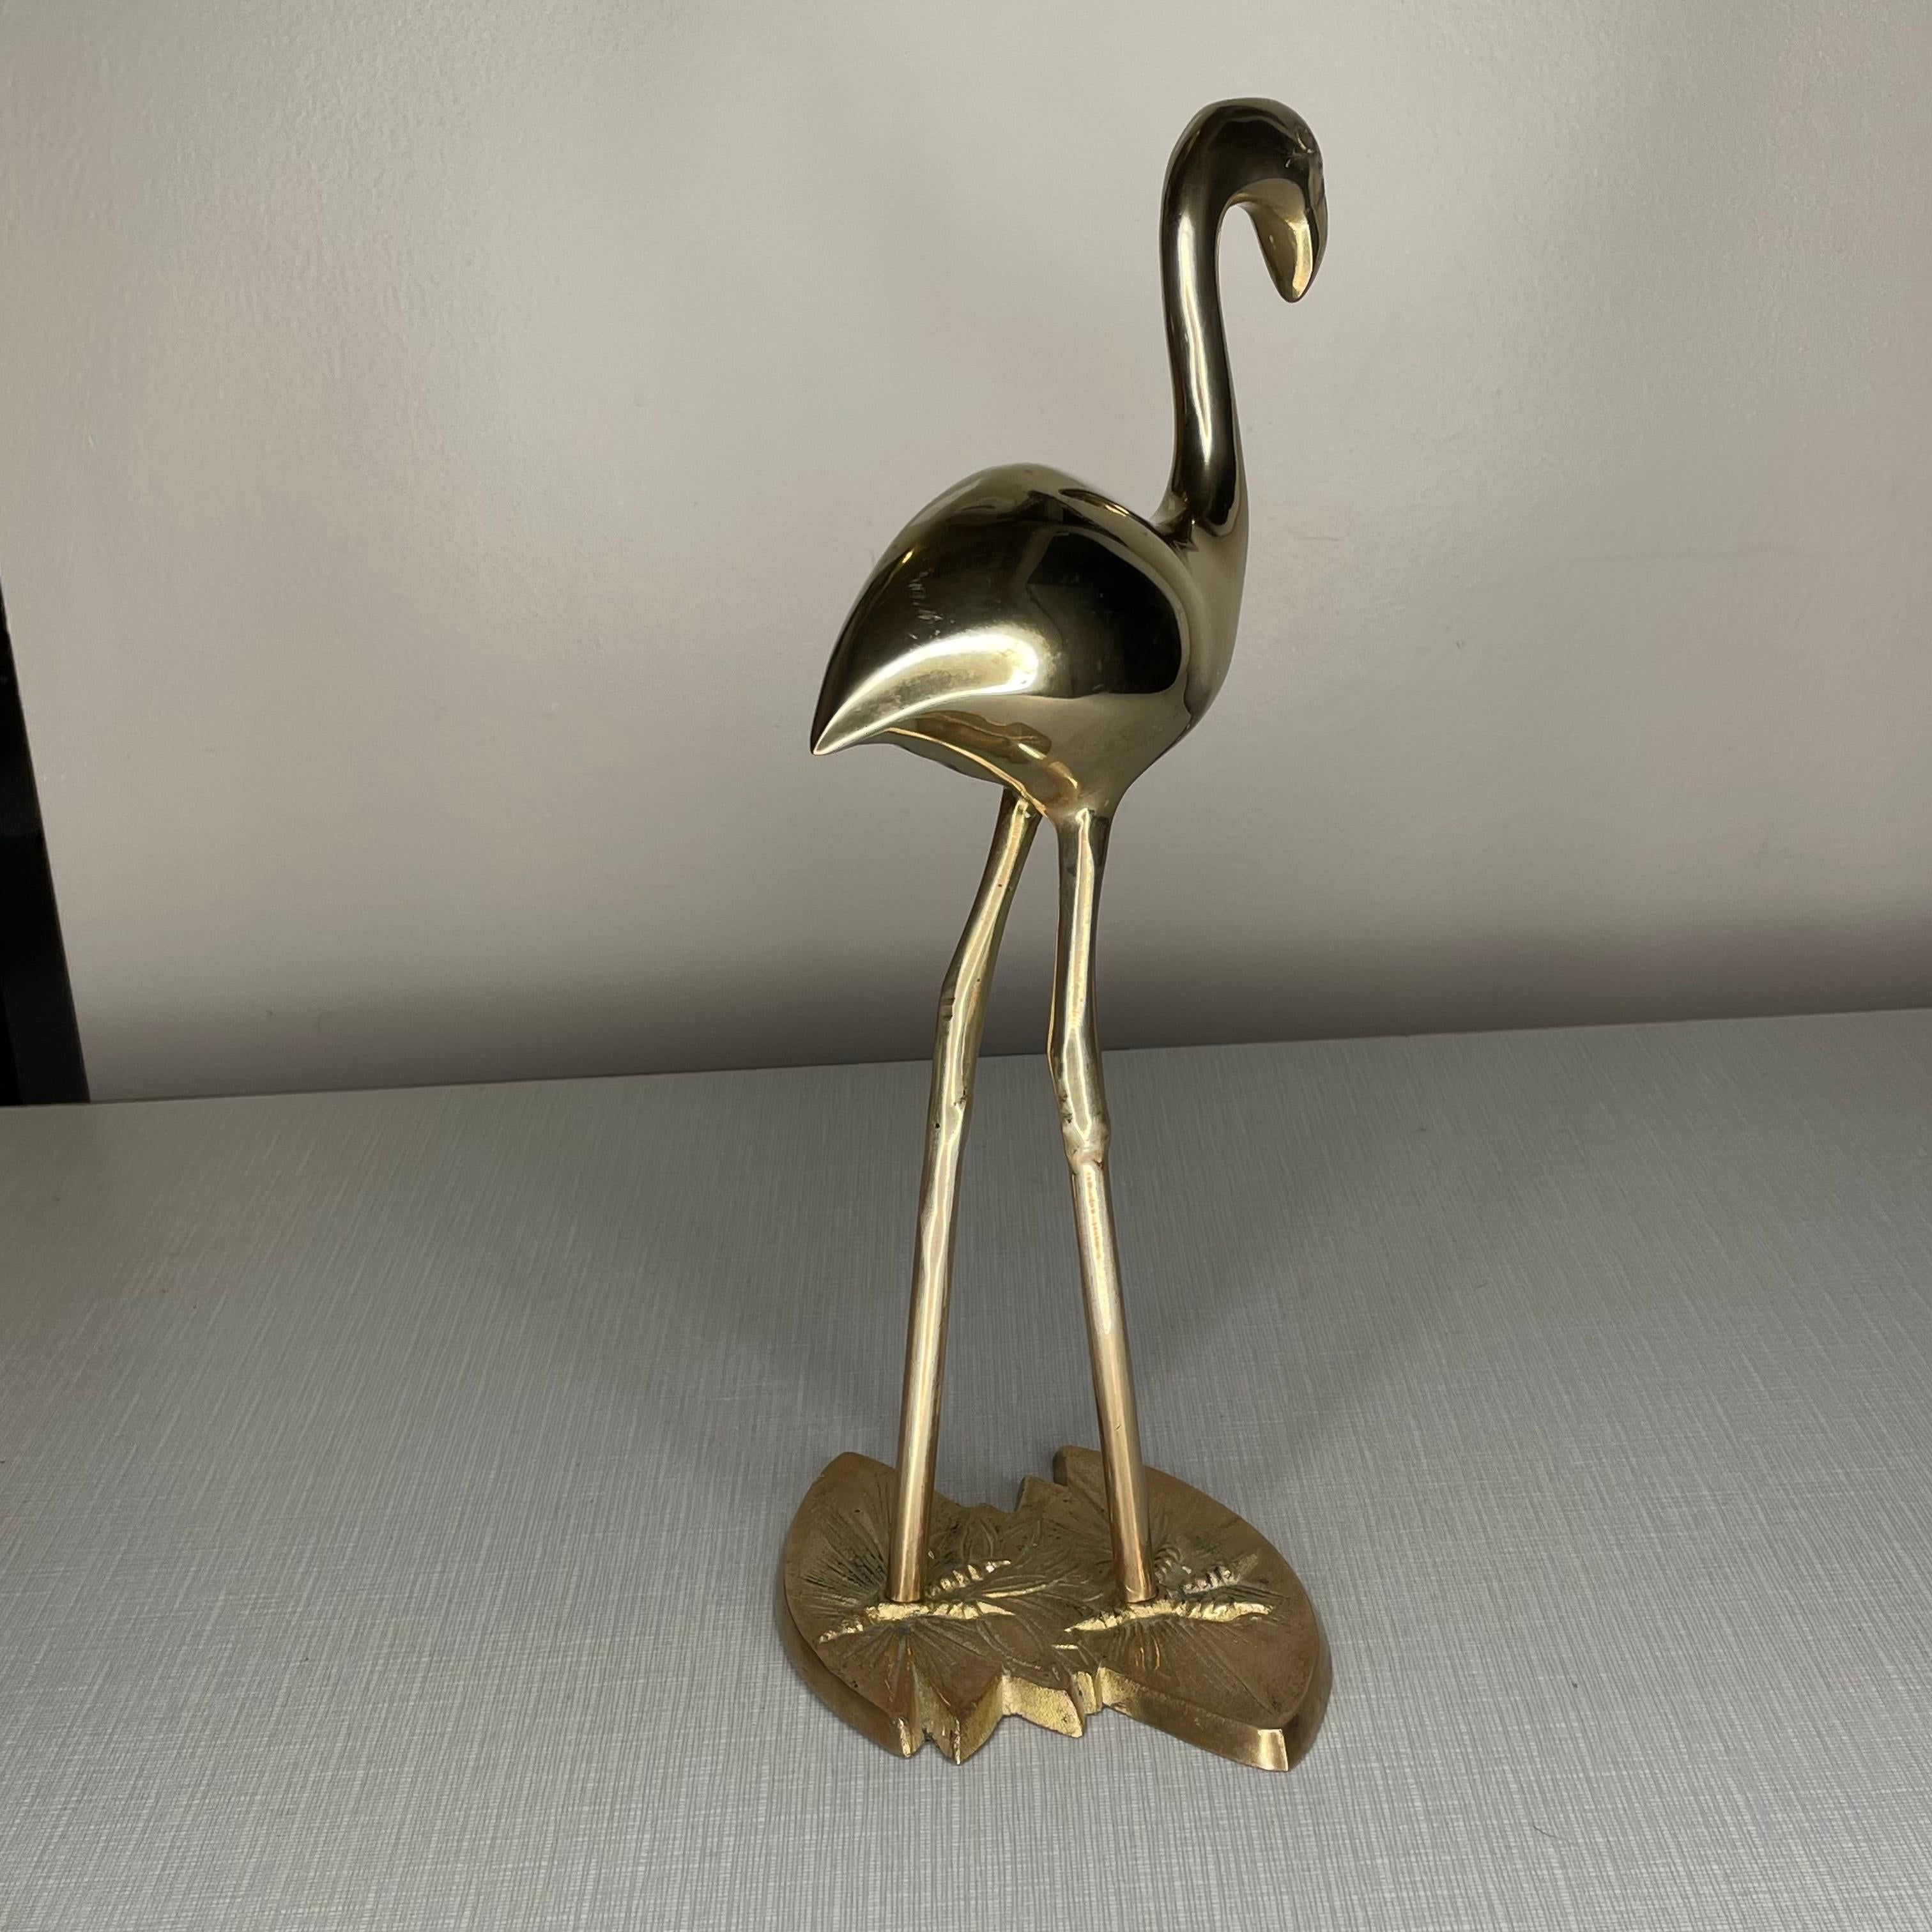 Beautiful brass flamingo polished to a mirror finish. This piece is in exceptional condition.